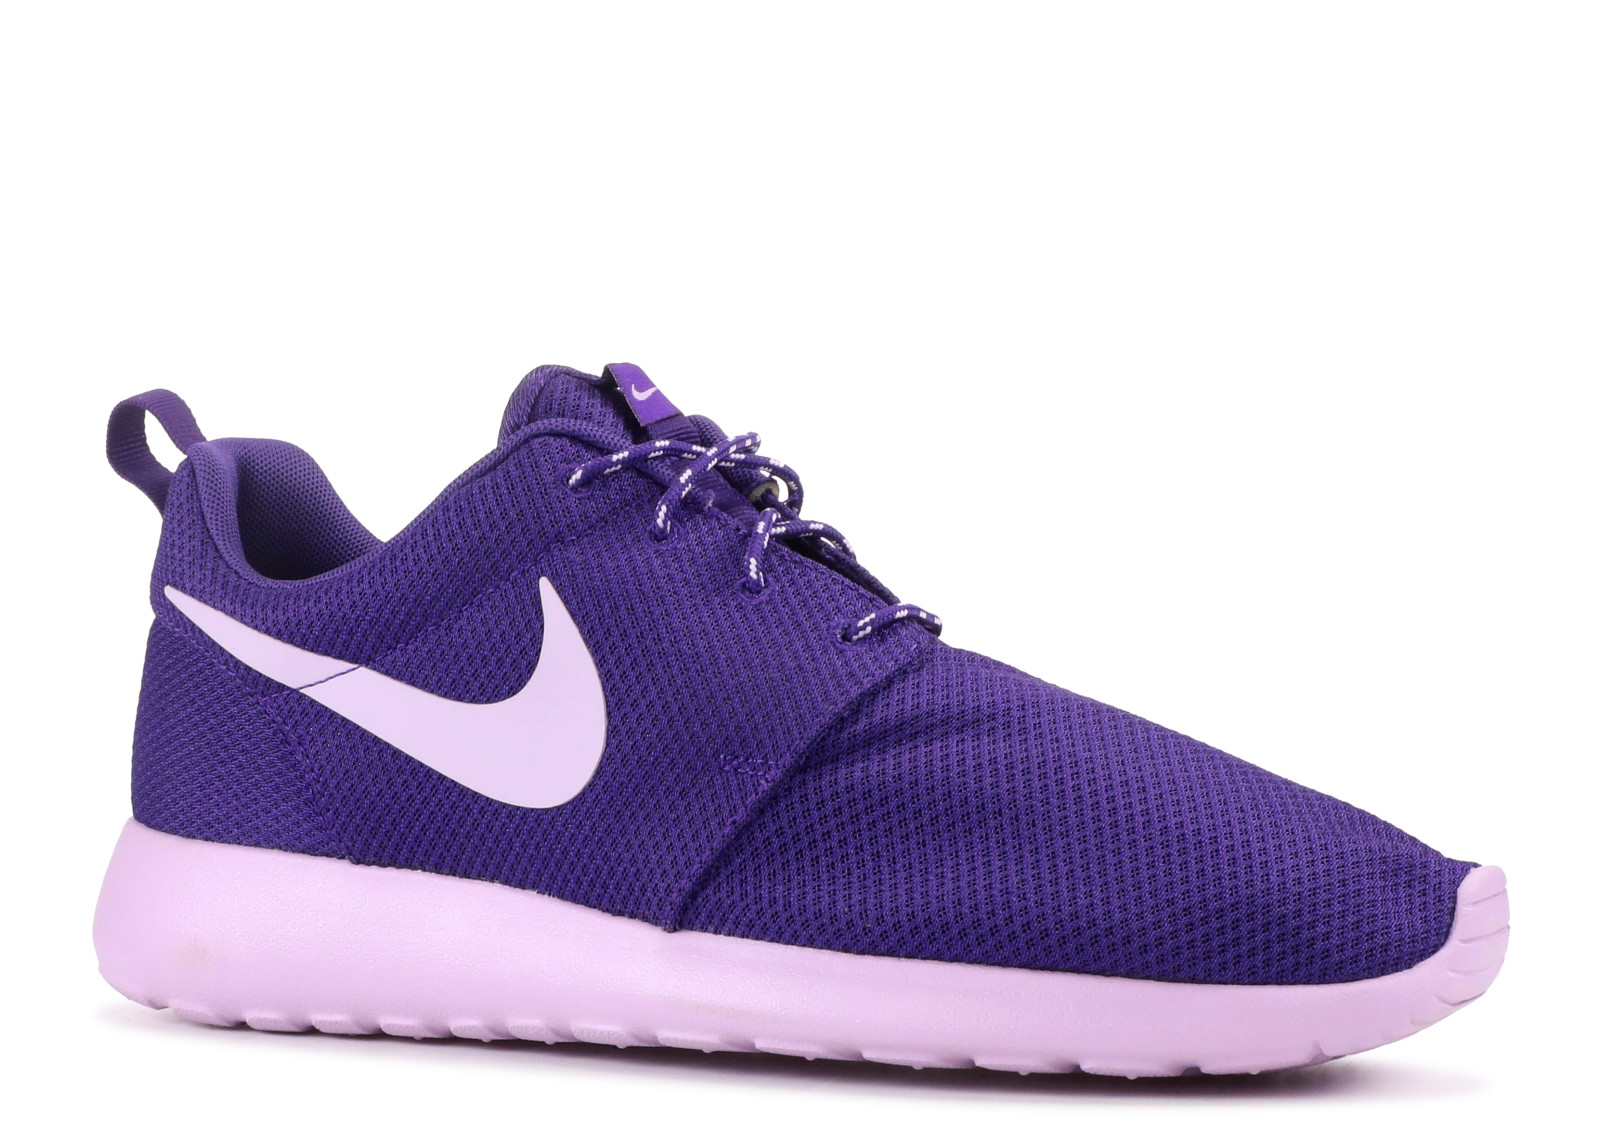 GmarShops - 503 - up with the neutral hue movement of the moment is the Nike - Womens Roshe Run Purple Wash Volt Court Violet 511882